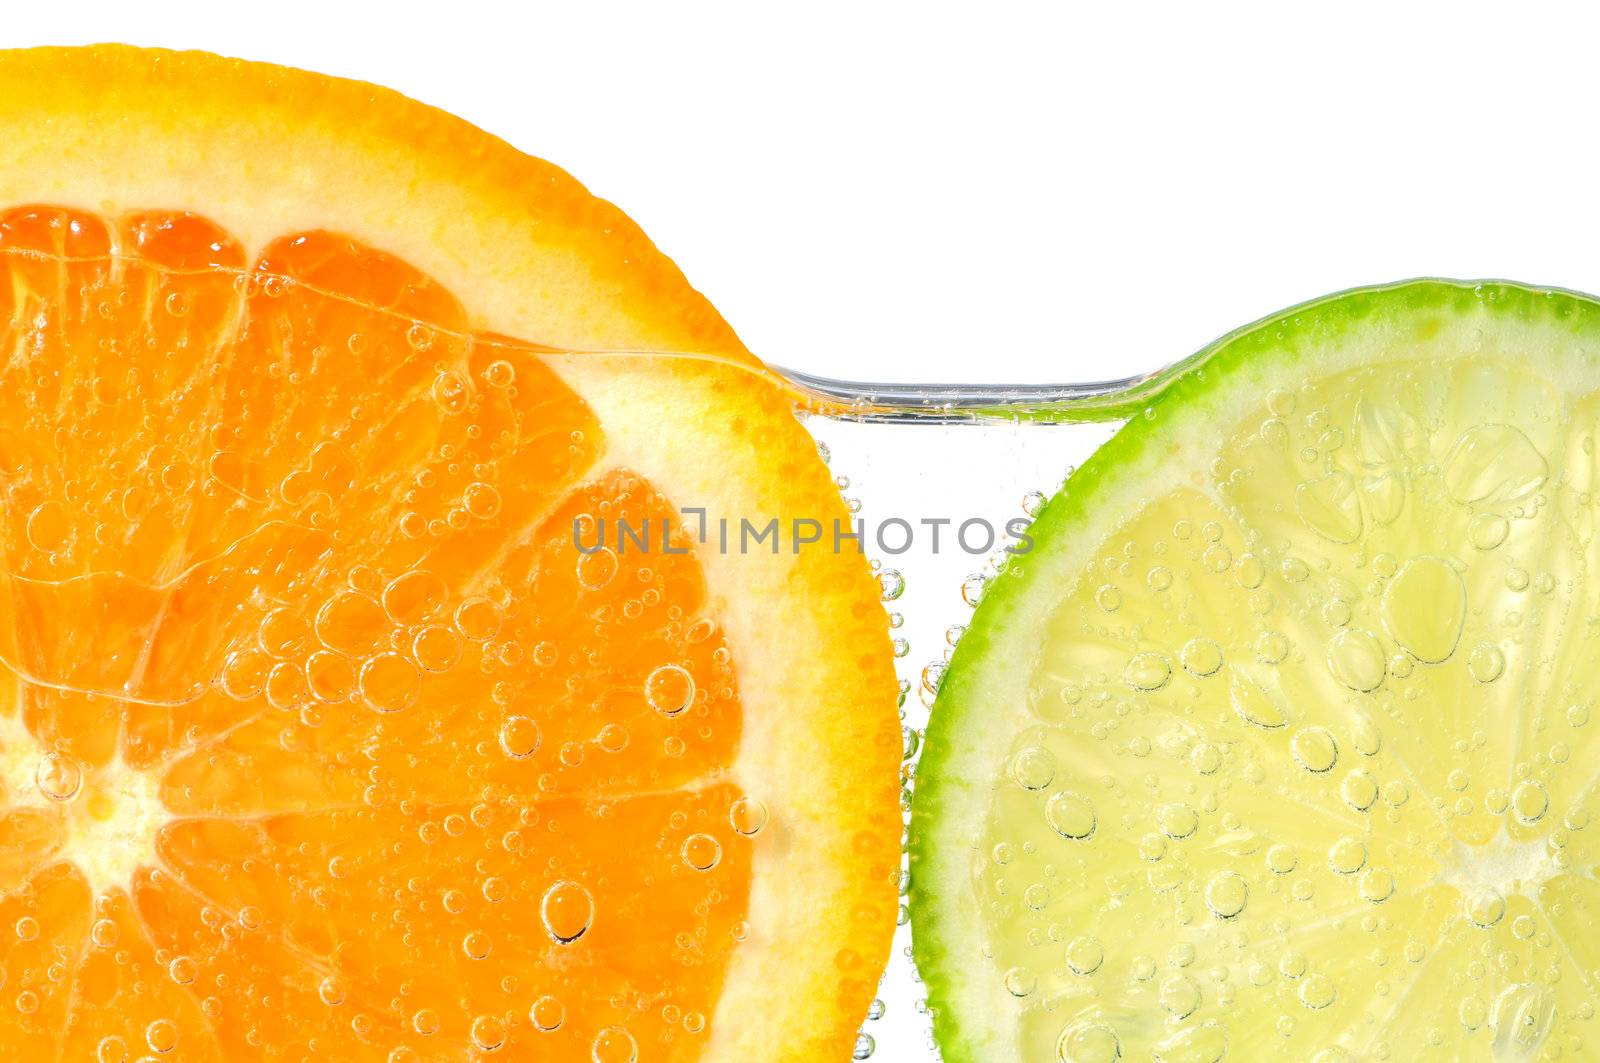 Orange and lime slices in water by elenathewise